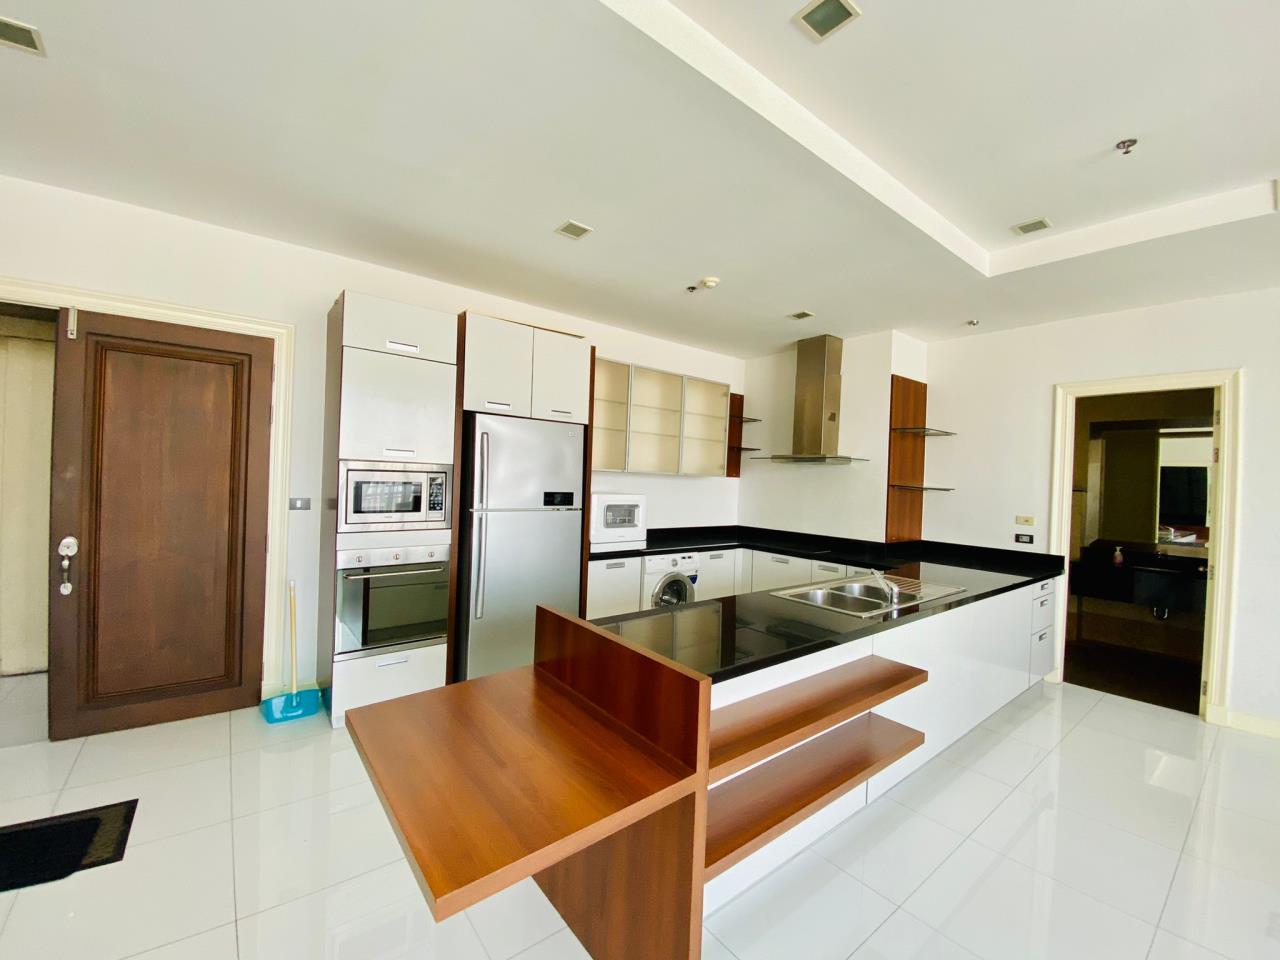 2 bedrooms 3 bathrooms at prime mansion for rent